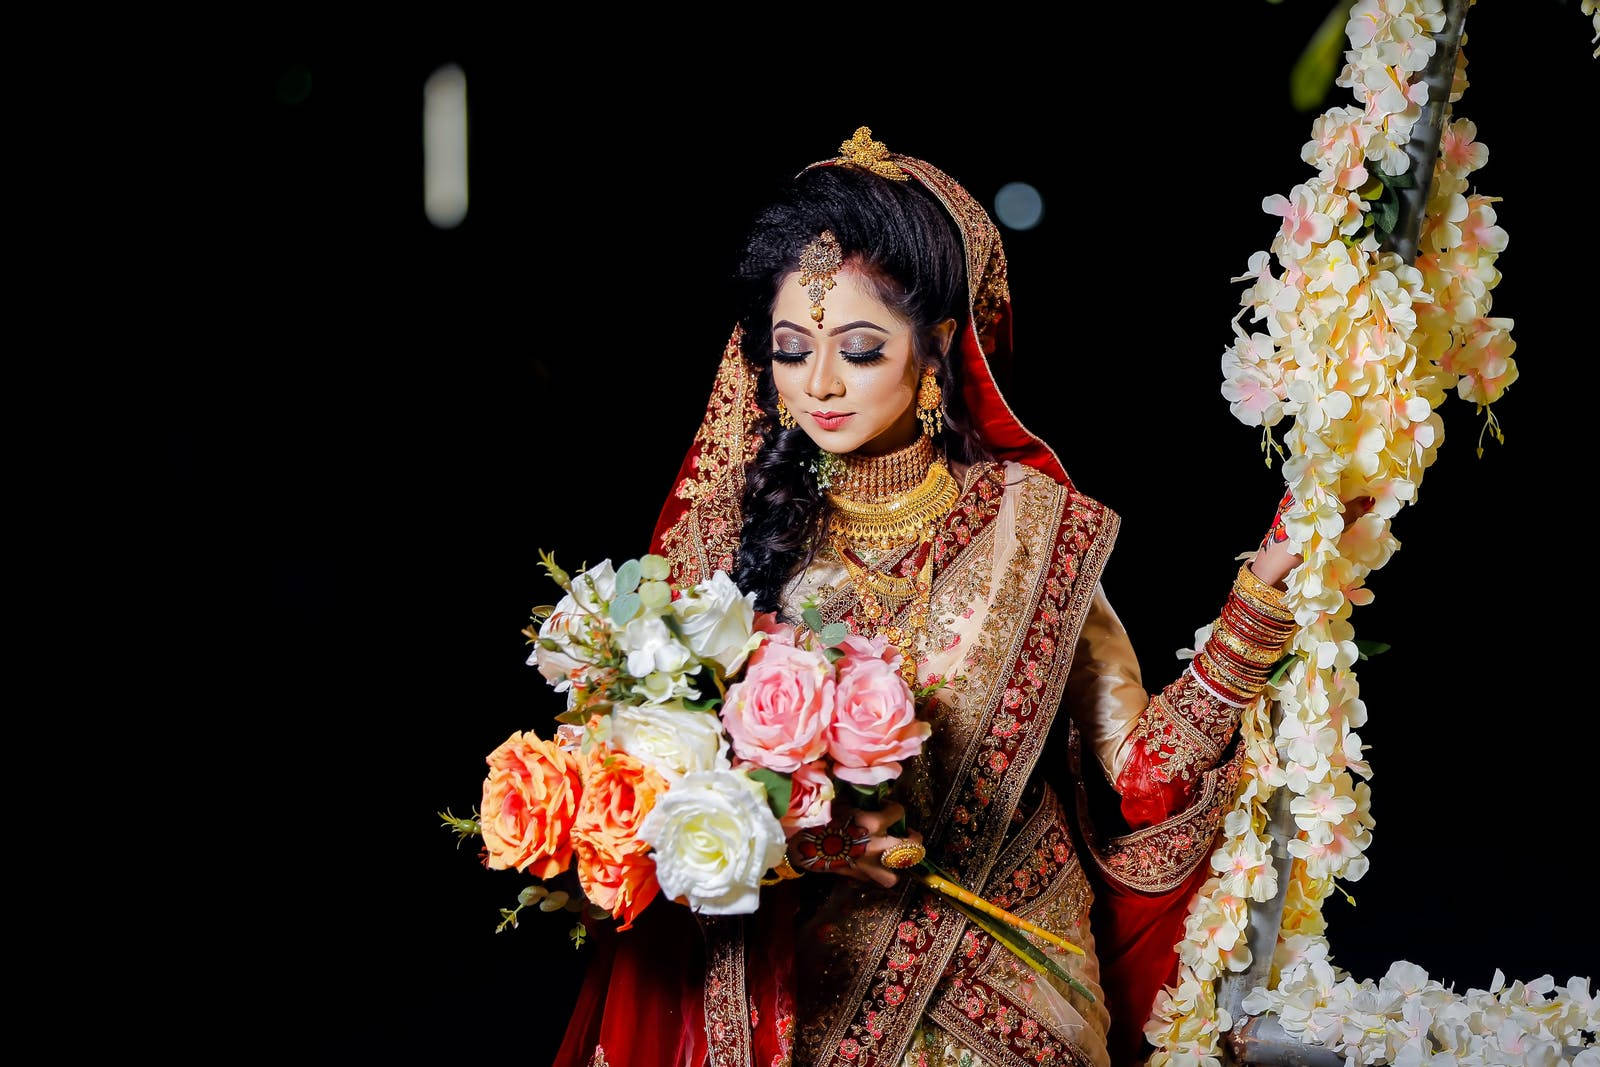 Radiant Indian Bride Holding A Bouquet At Her Wedding Wallpaper